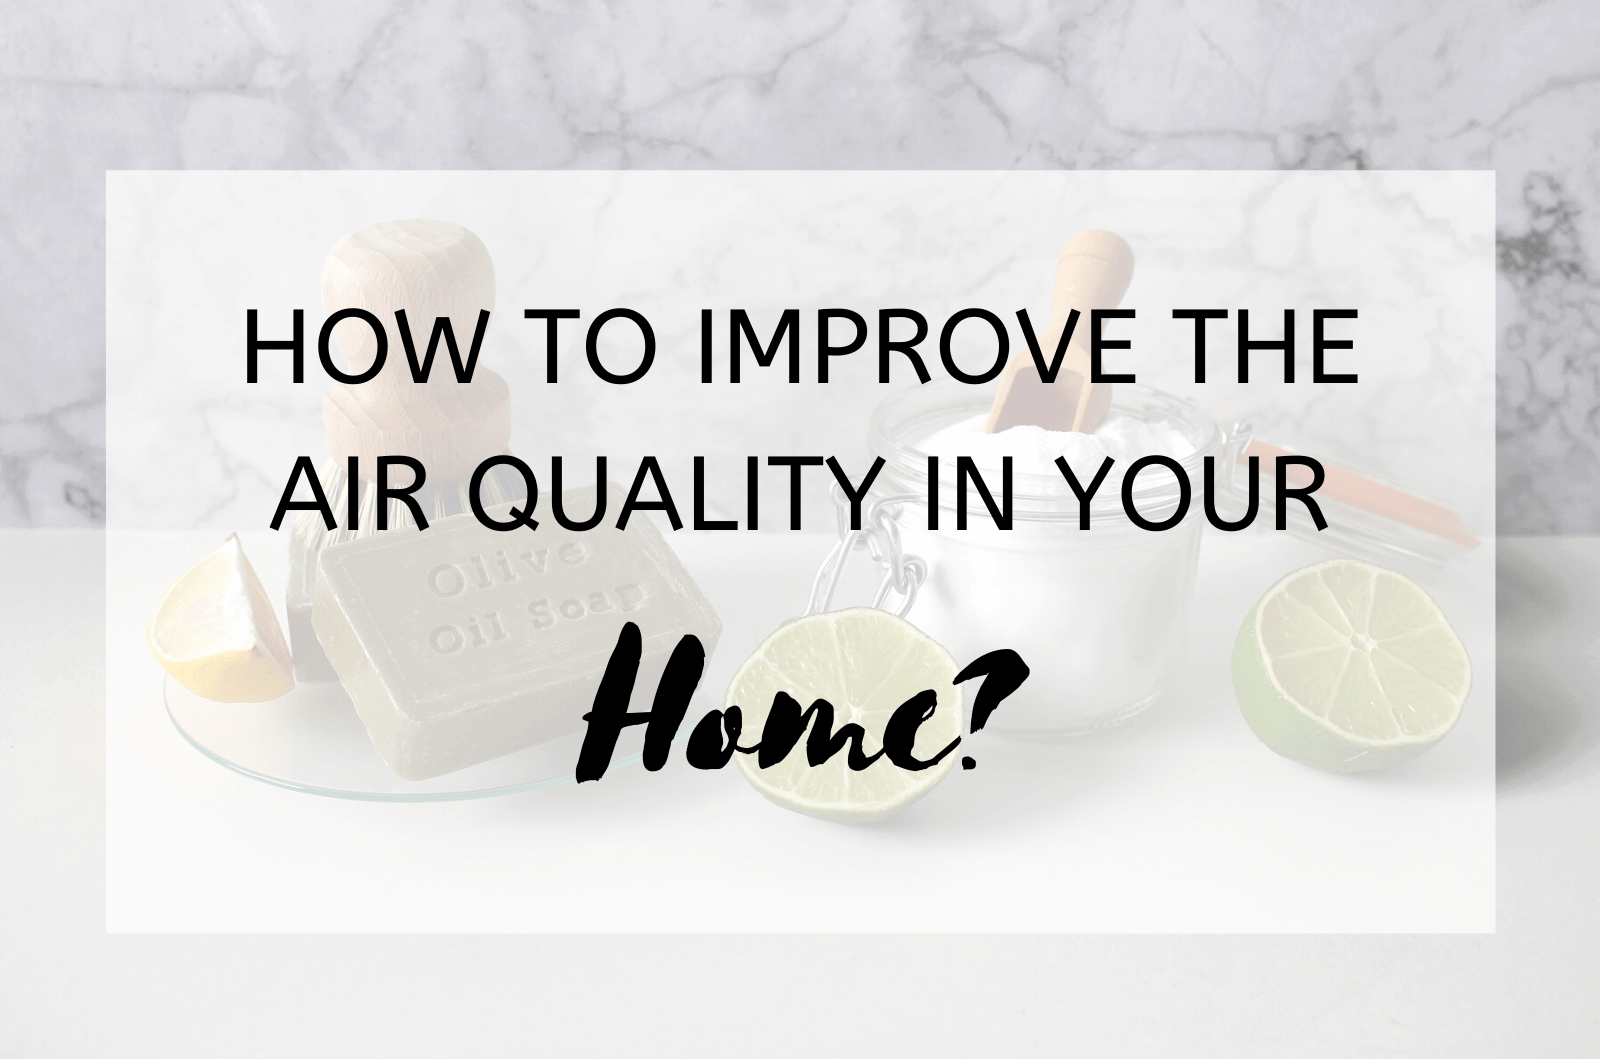 How To Improve The Air Quality In Your Home